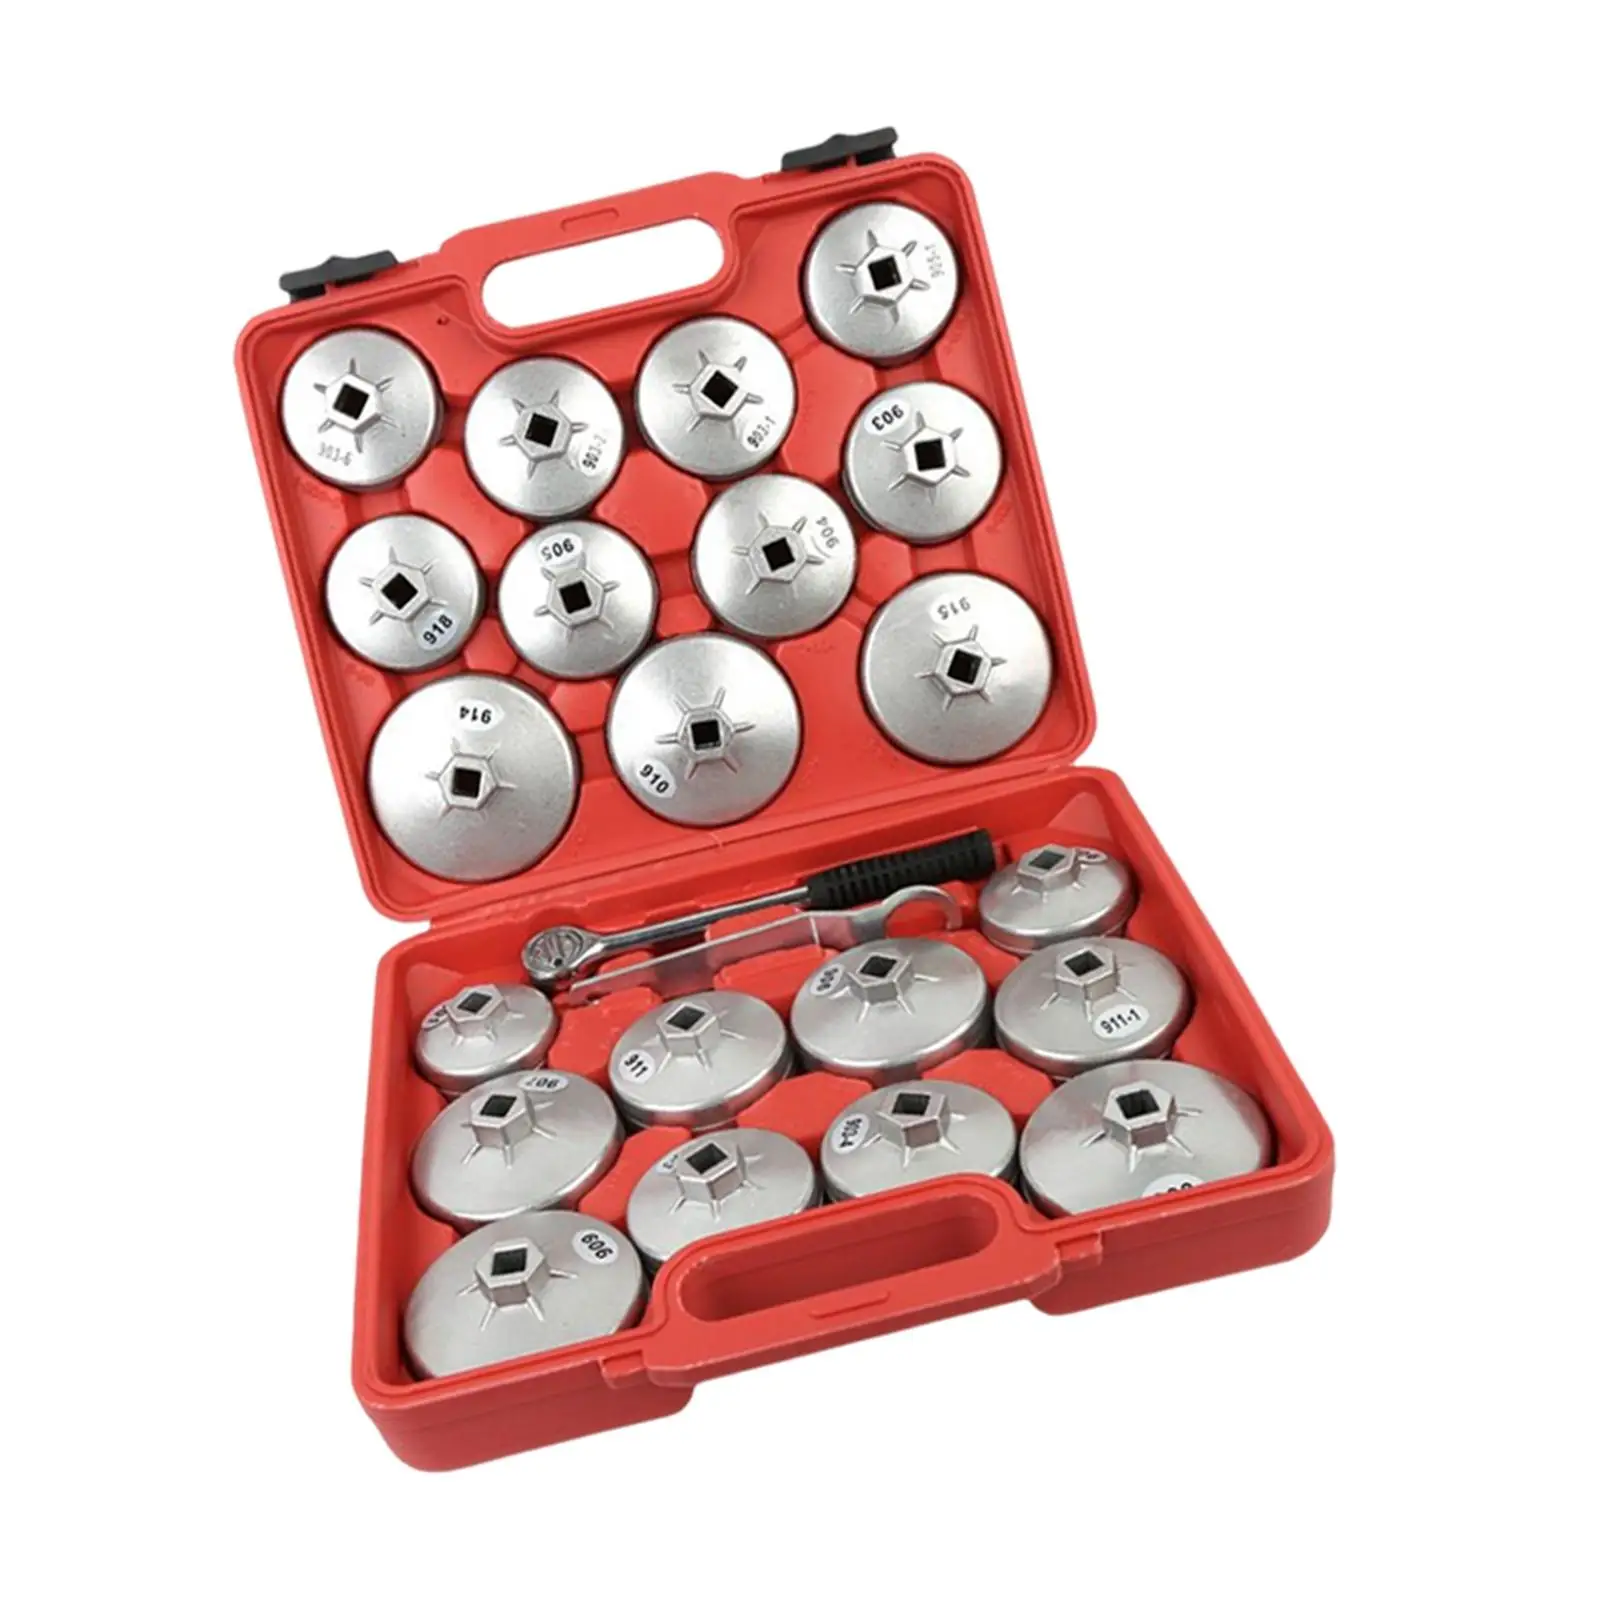 23Pcs Oil Filter Wrench Cup Set Silver Cup Type Wrench Remover Cup for Audi Auto 901-915 Aluminium Car Supplies Auto Parts